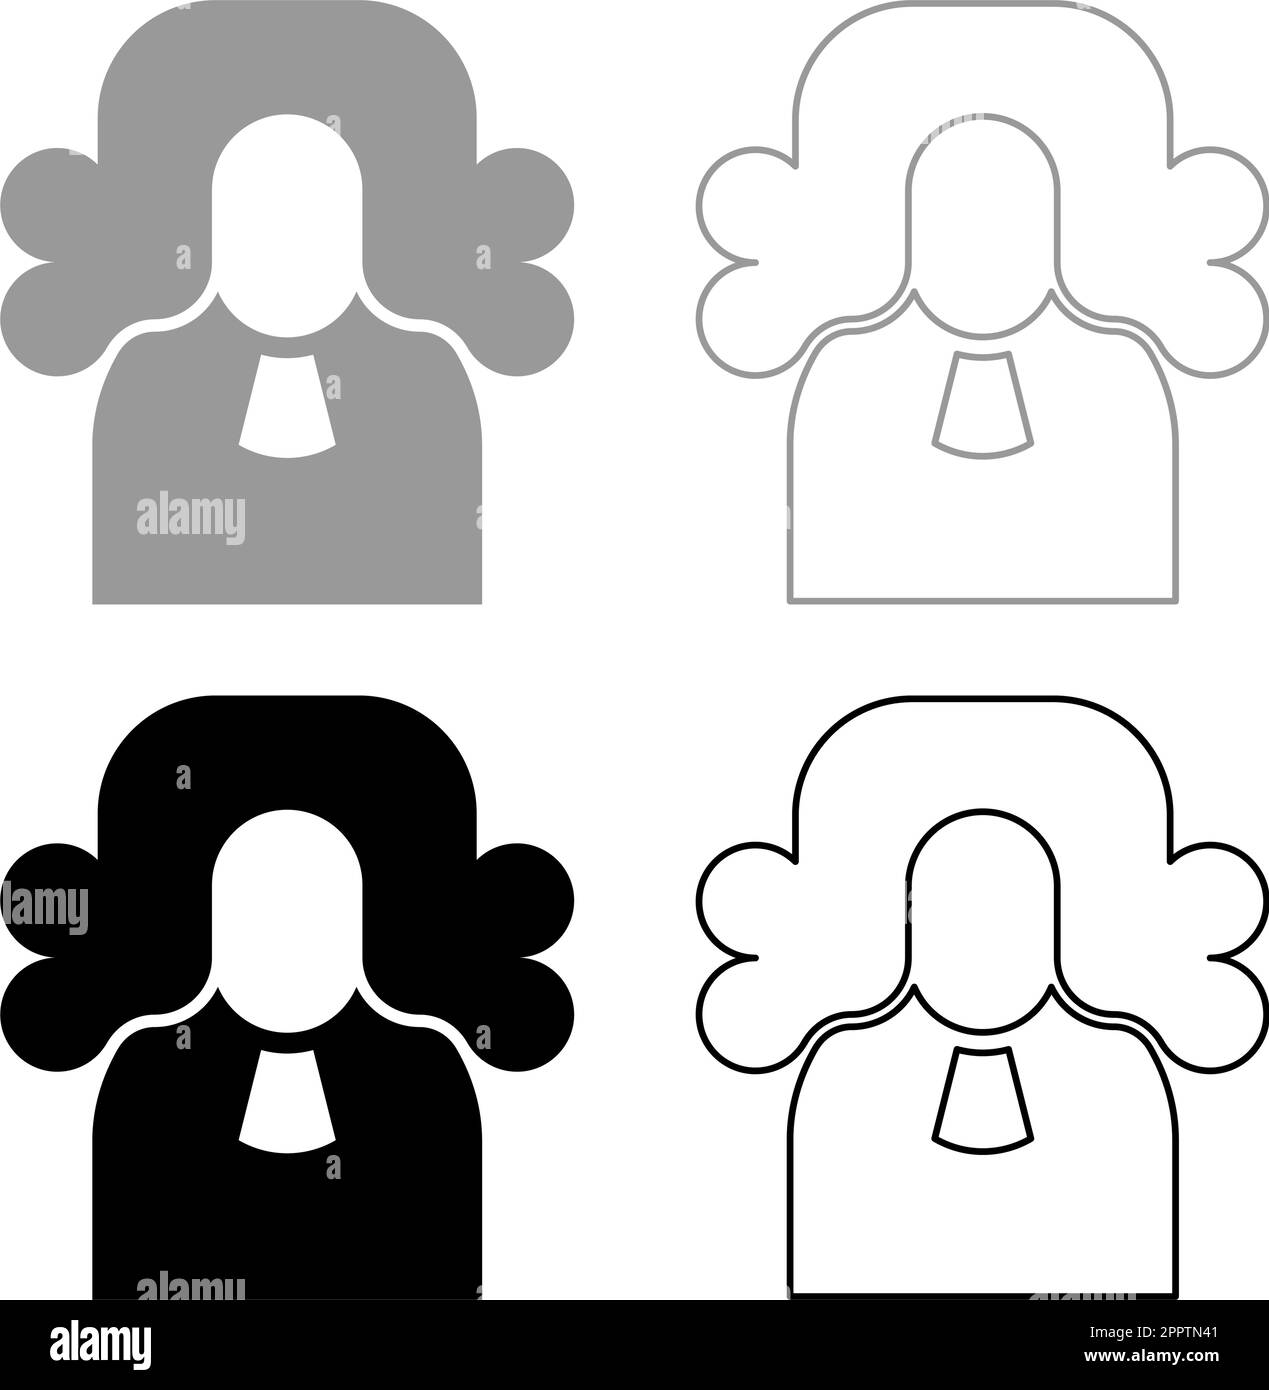 Judge lawyer jury avatar set icon grey black color vector illustration image solid fill outline contour line thin flat style Stock Vector